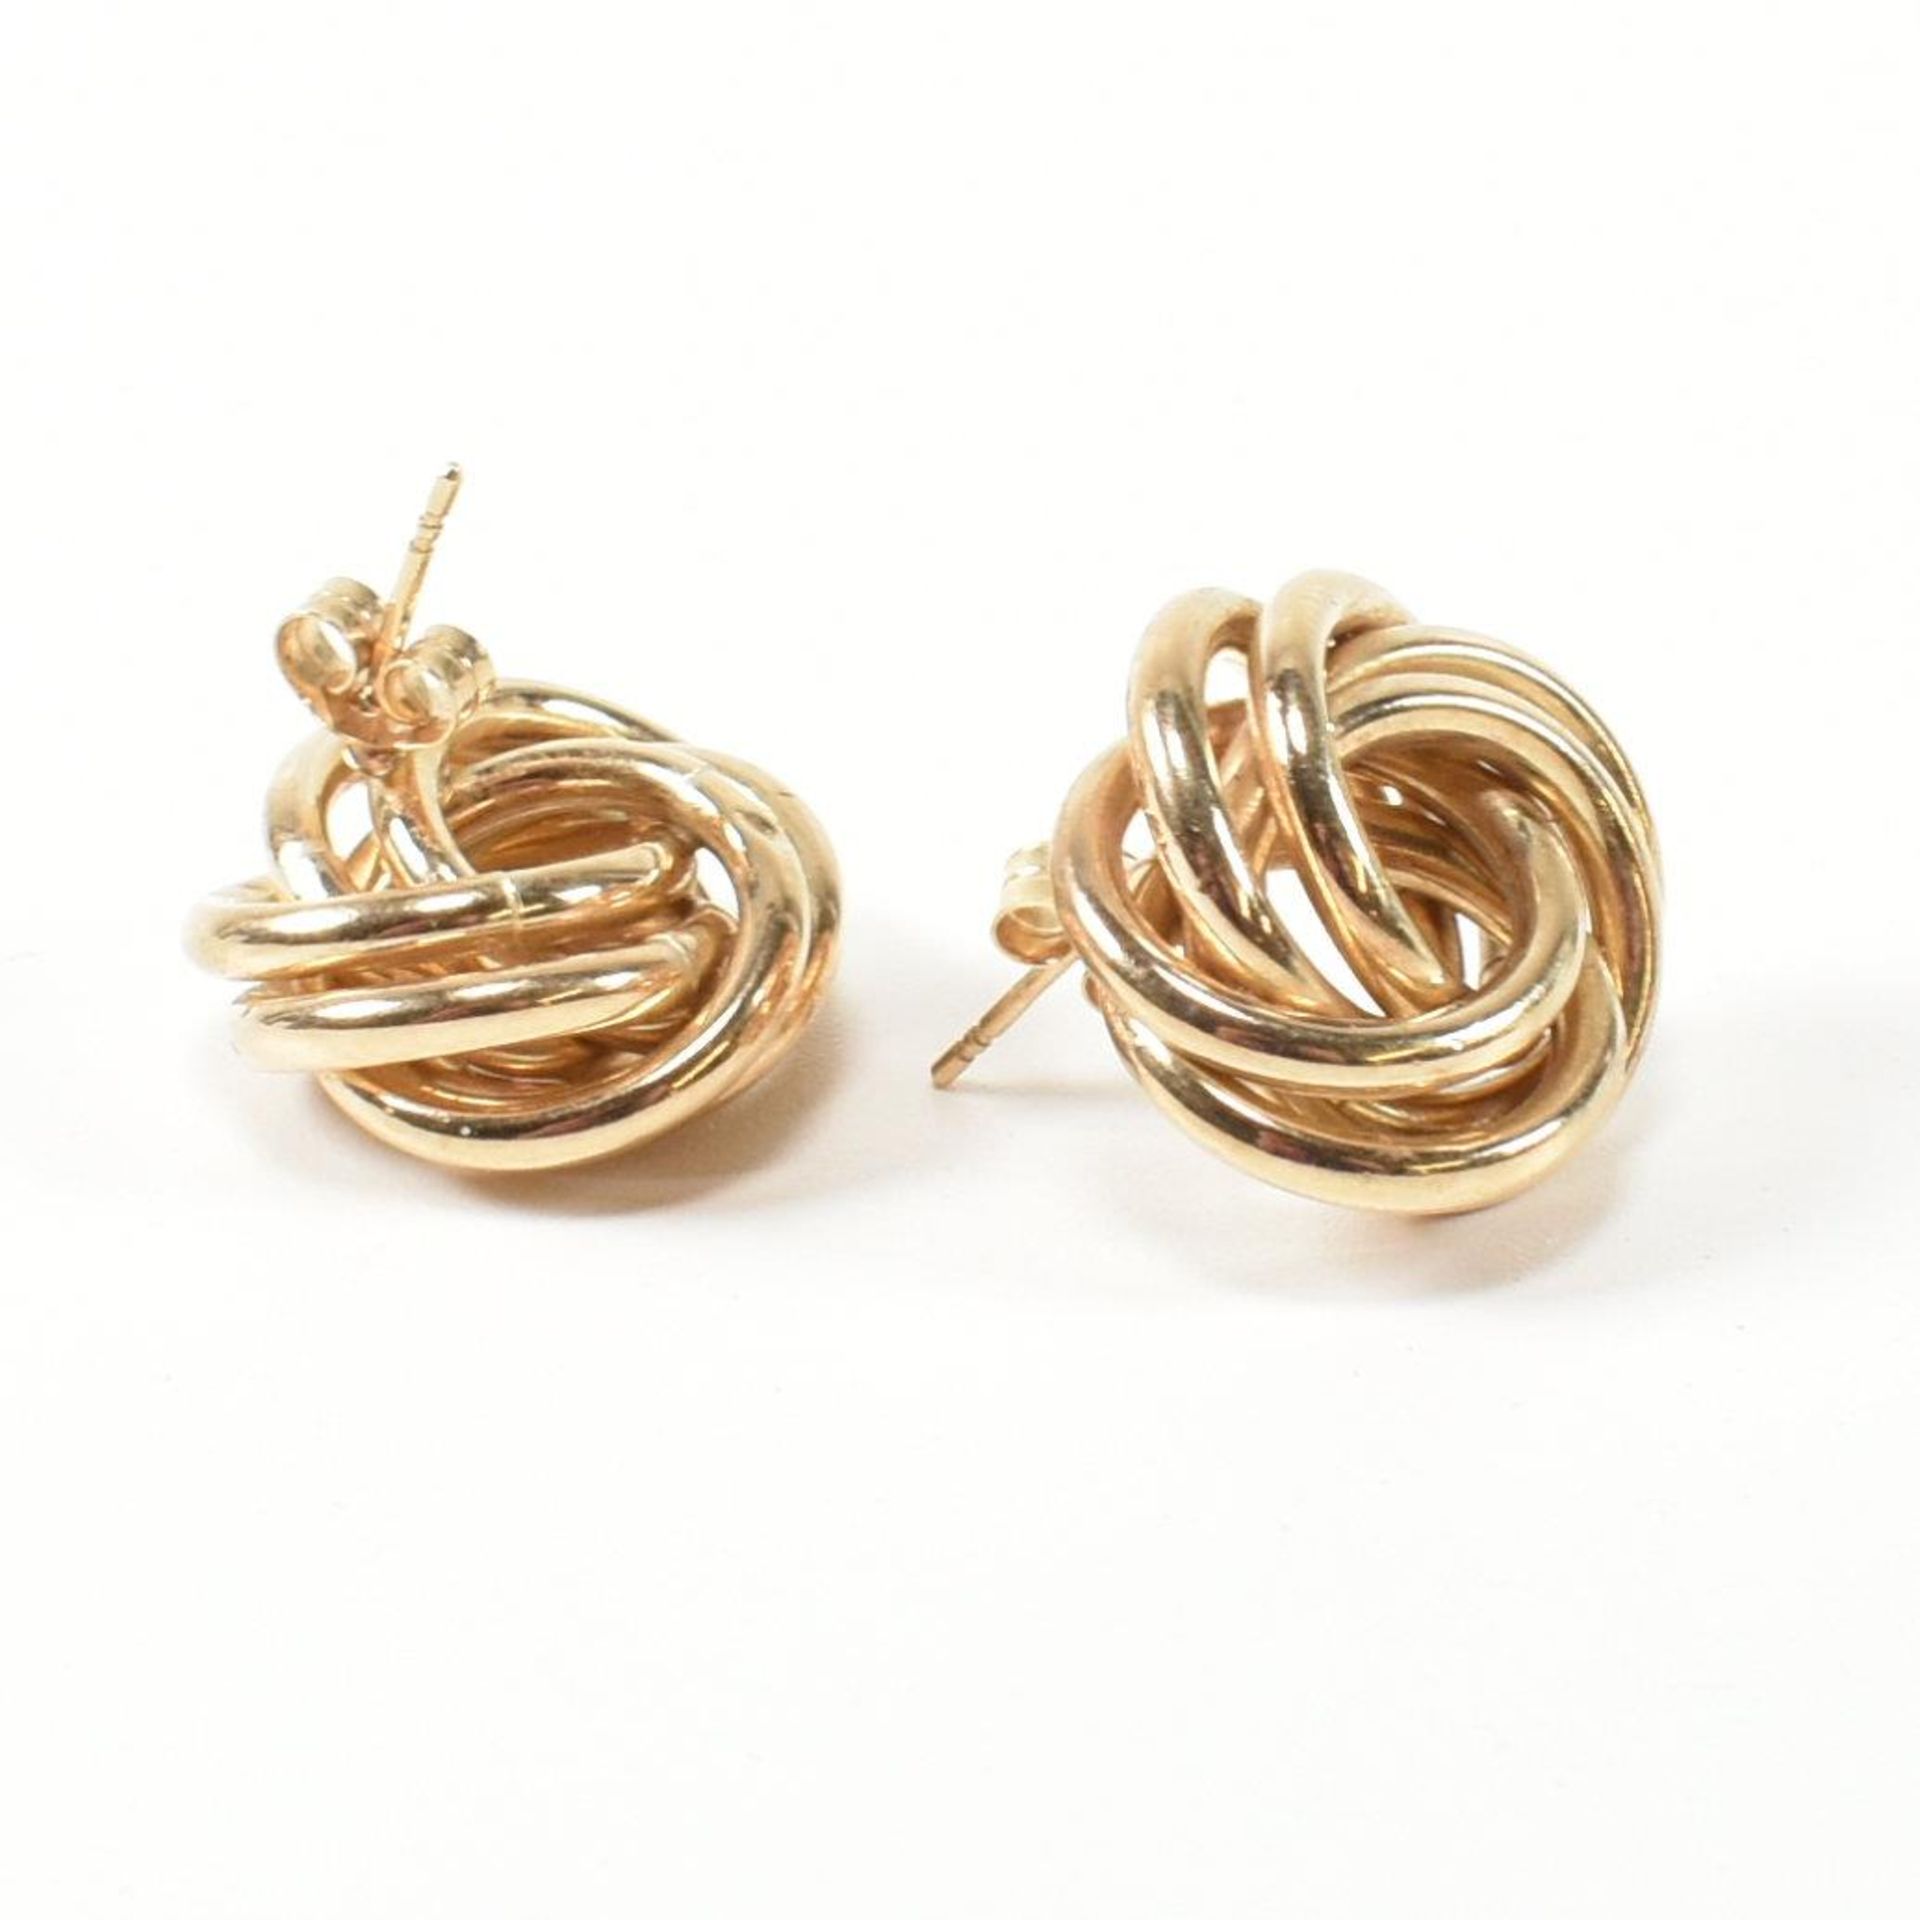 PAIR OF HALLMARKED 9CT GOLD KNOT STUD EARRINGS - Image 5 of 6